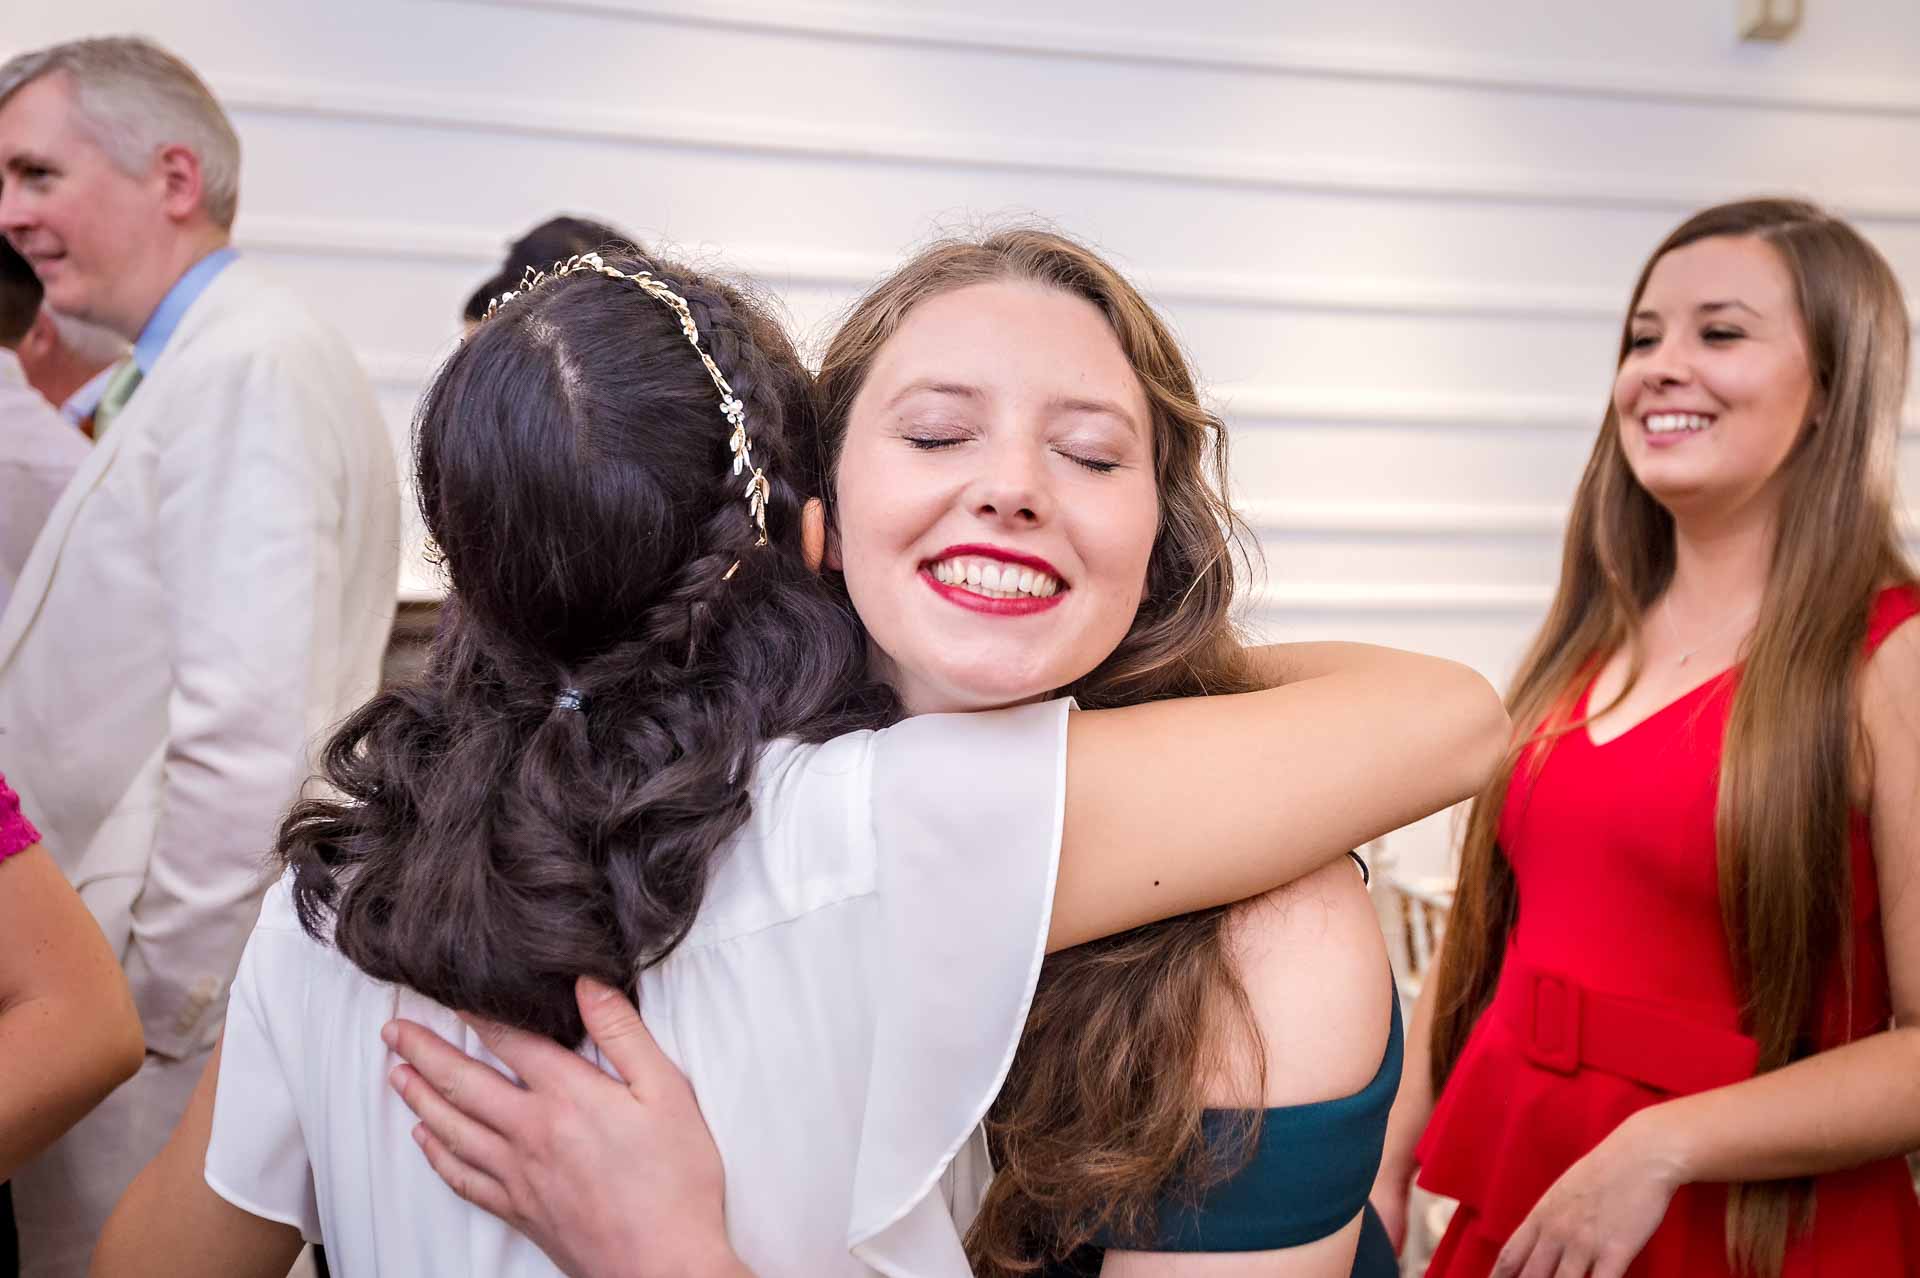 Bride and friend hug after wedding in London